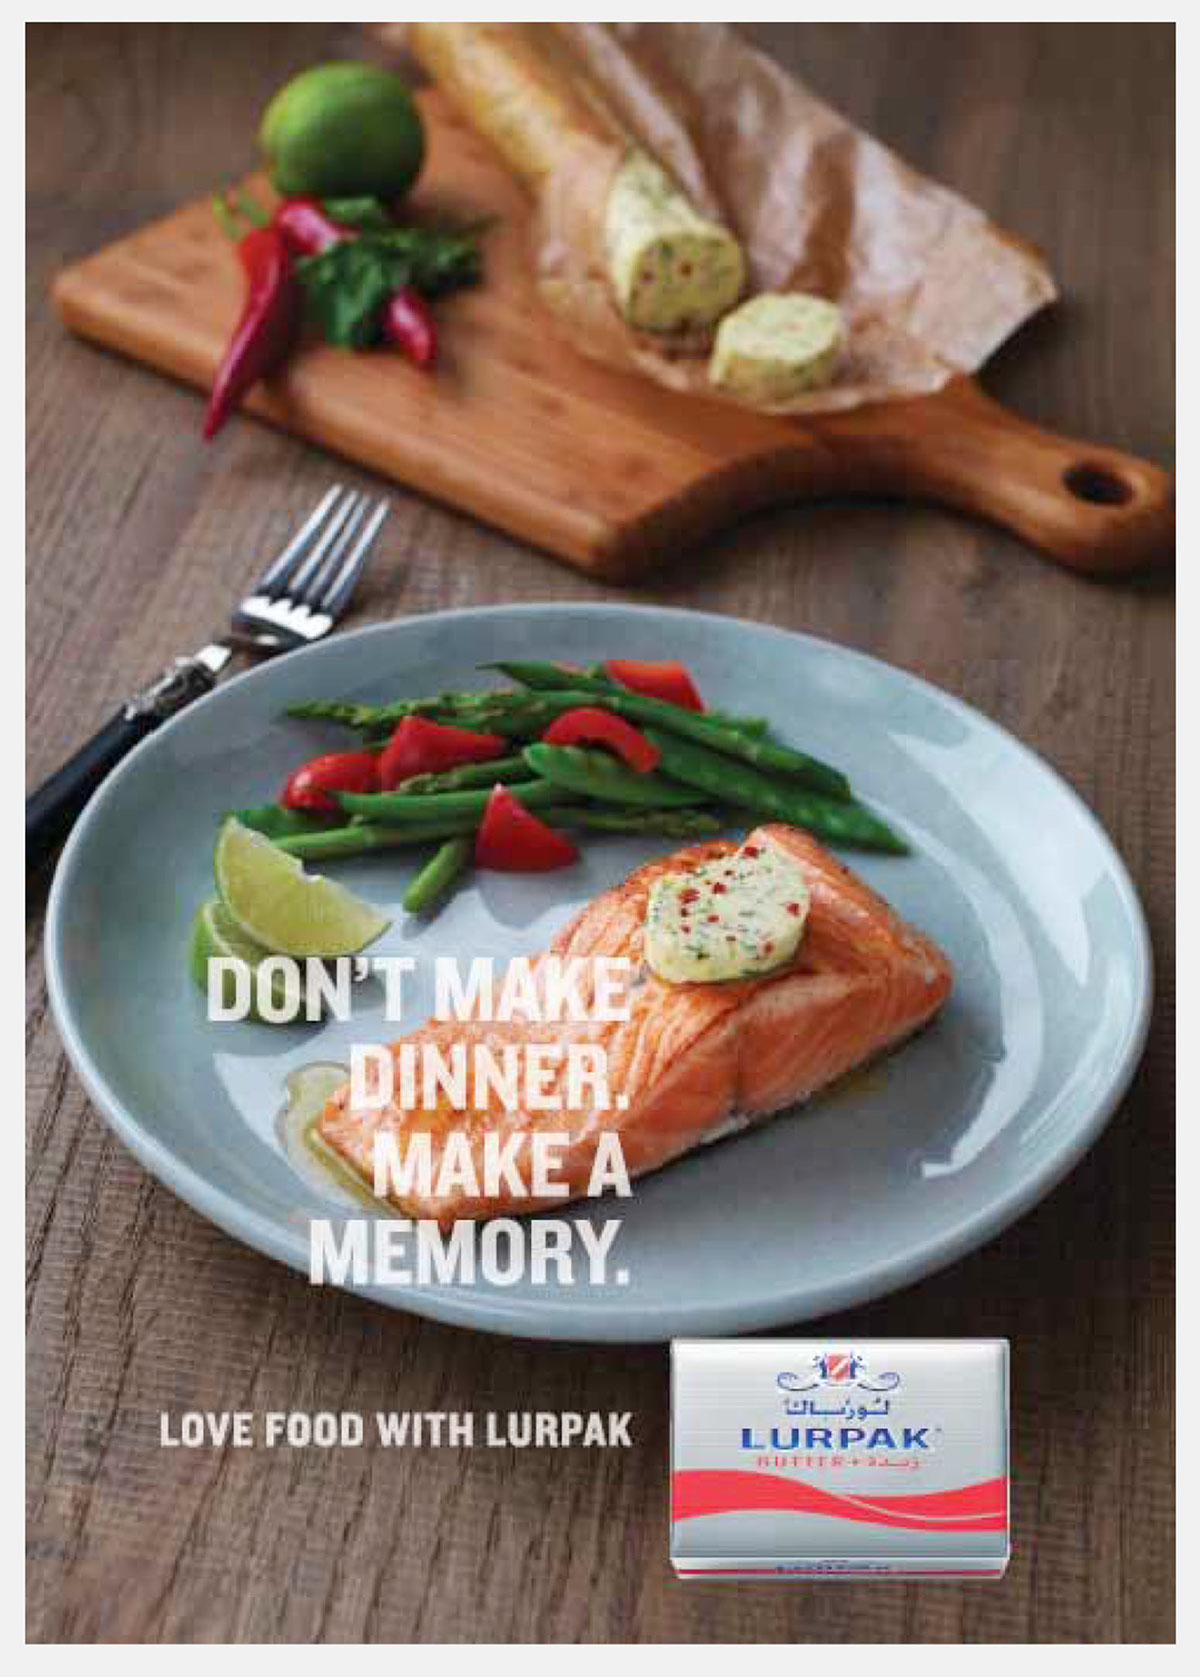 Lurpak cooking family middle east